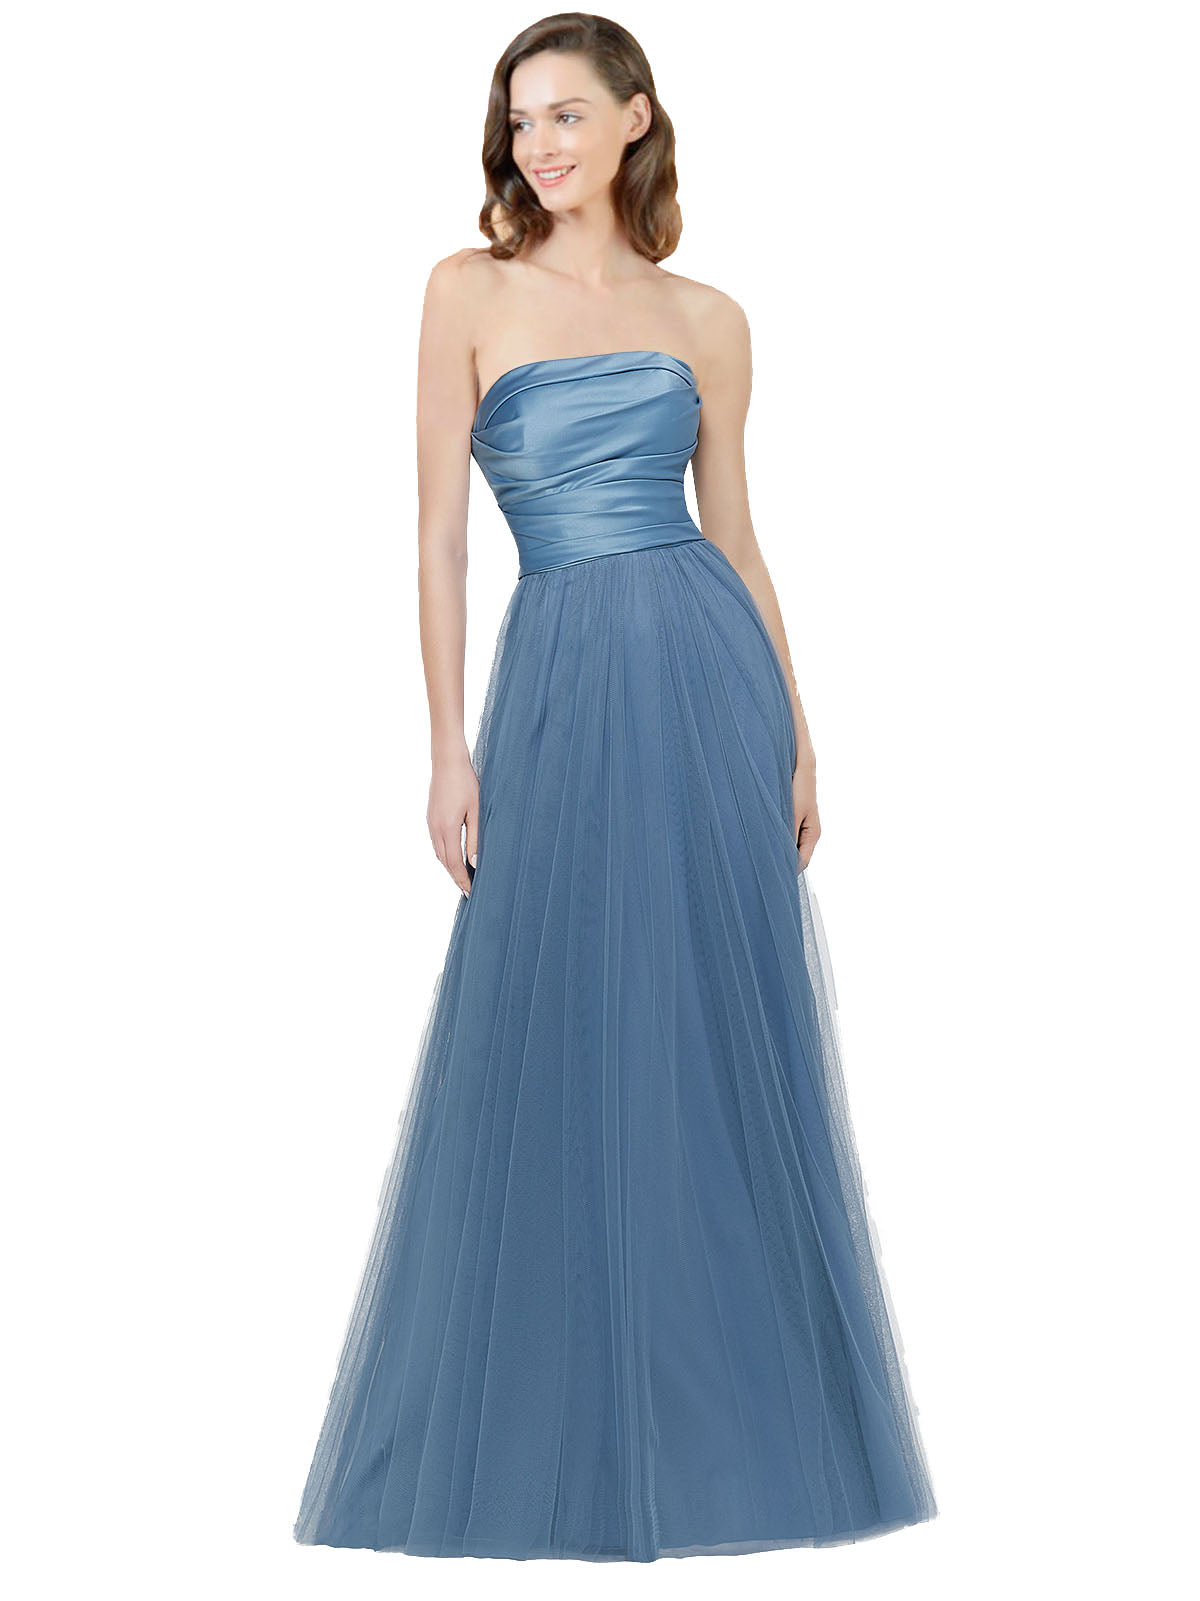 RightBrides Donna Blue A-Line Strapless Floor Length Long Bridesmaid Dress with Low Back